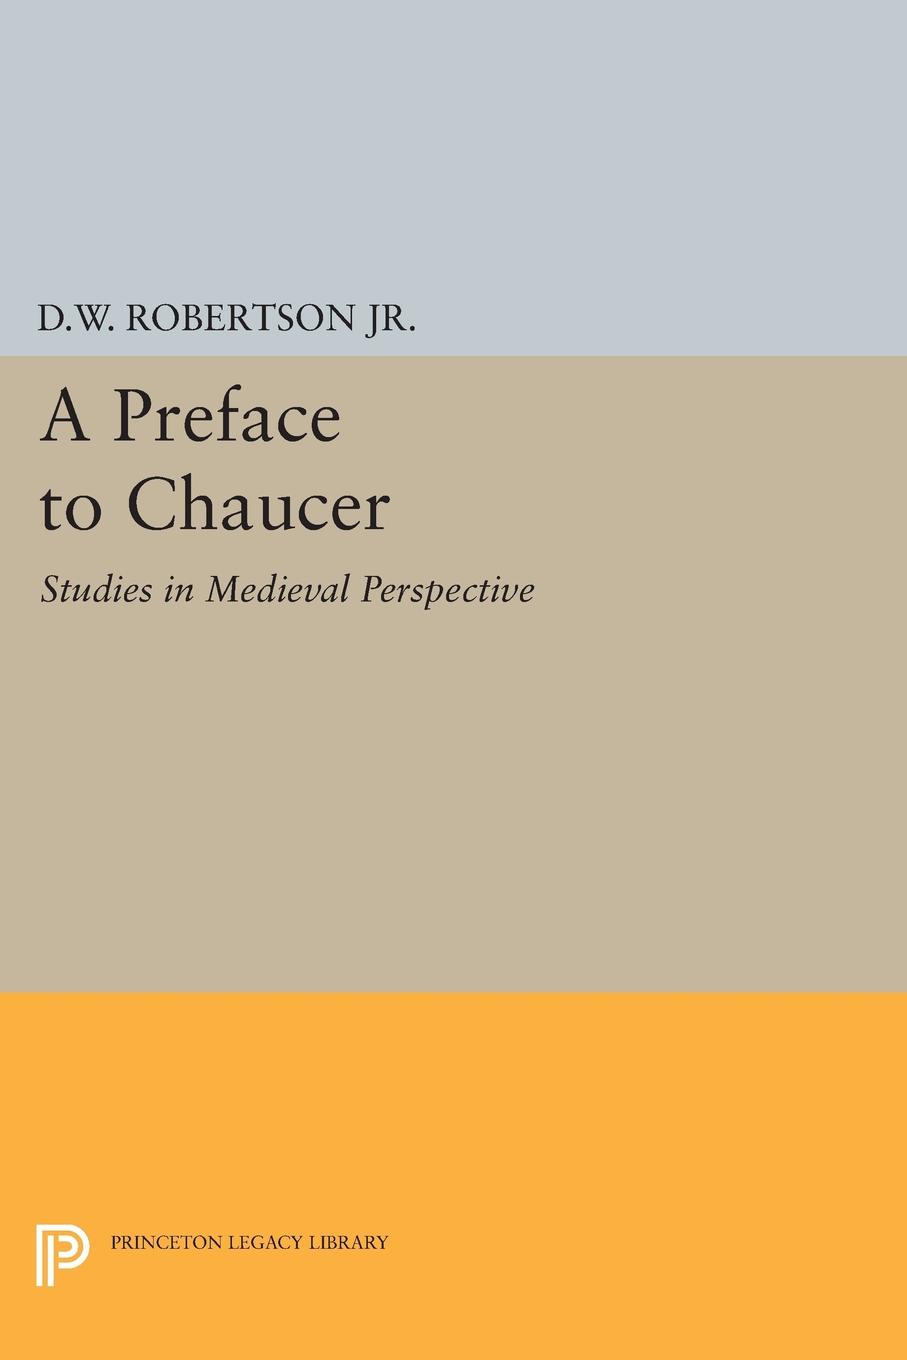 A Preface to Chaucer. Studies in Medieval Perspective